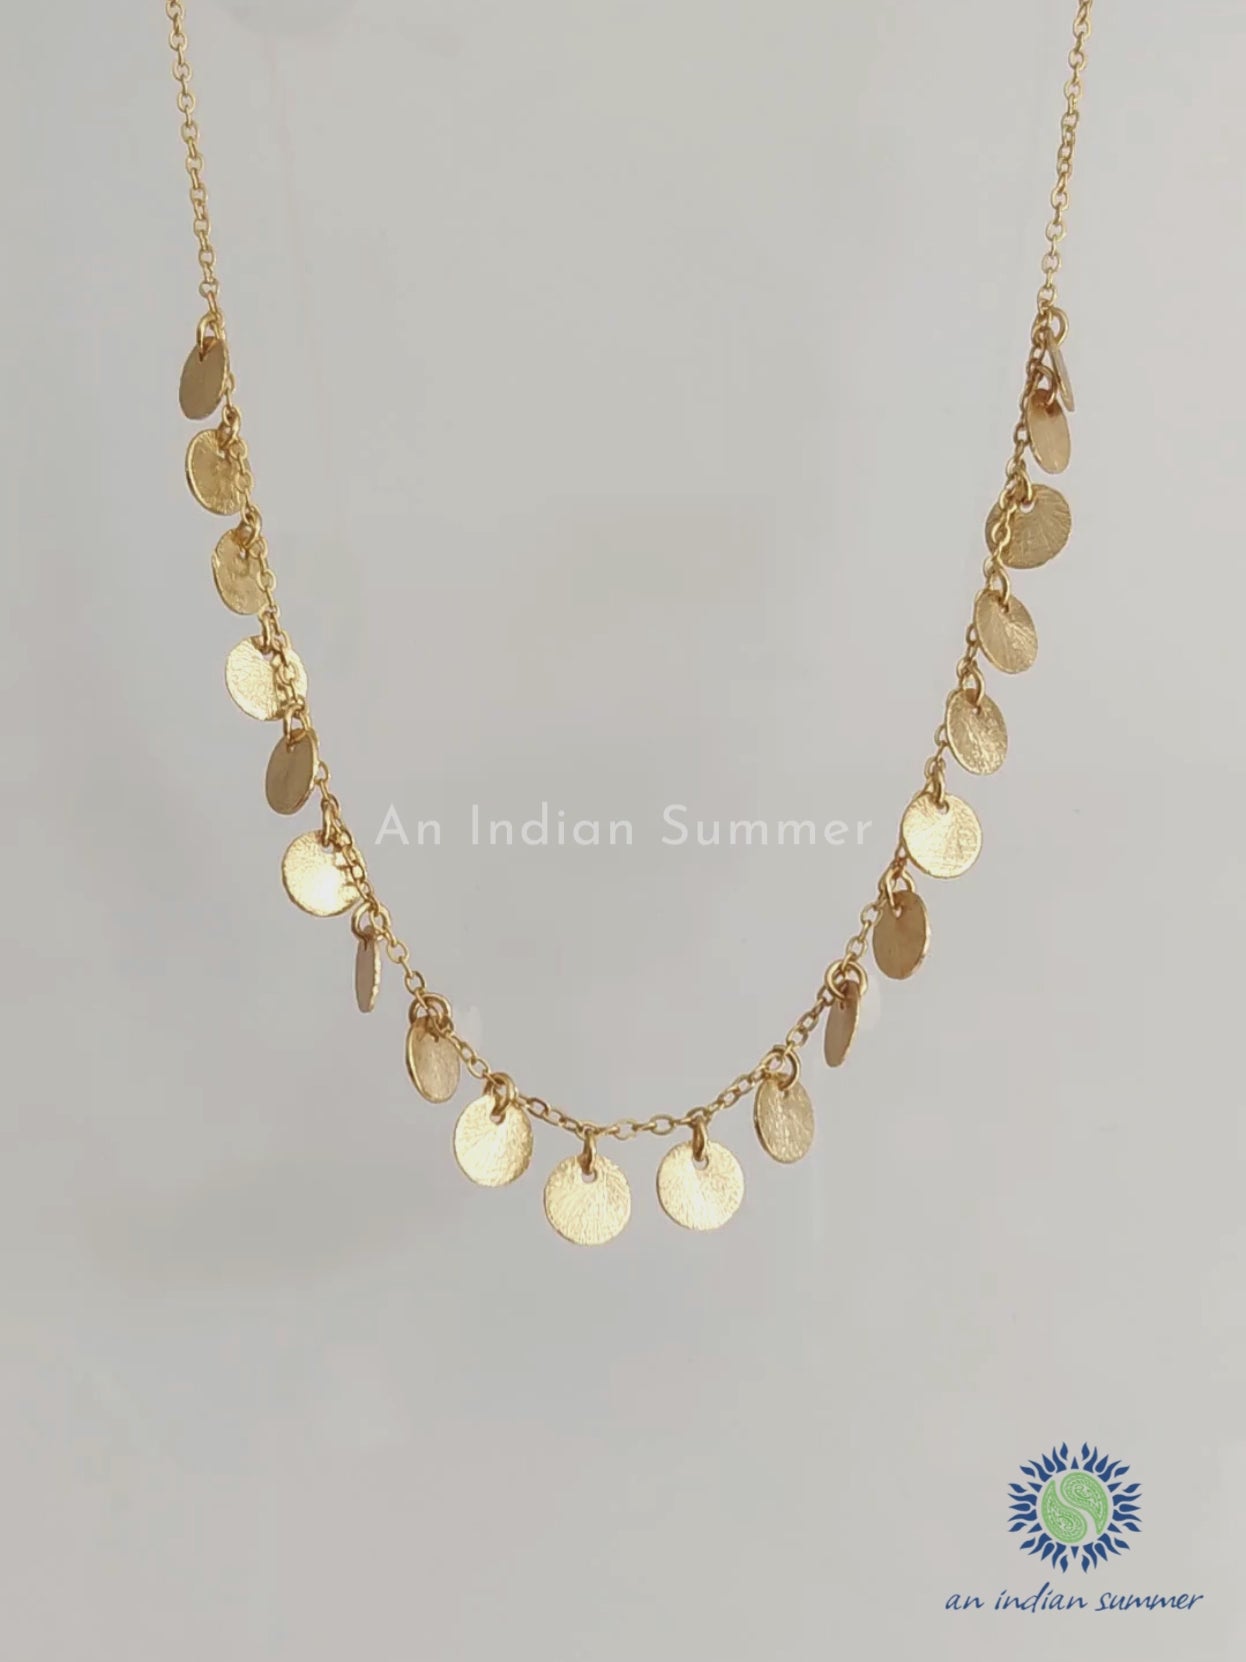 Shimmer Necklace | Hammered Discs | 22 Carat Gold Plated Semi Precious Stones | An Indian Summer | Seasonless Timeless Sustainable Ethical Authentic Artisan Conscious Clothing Lifestyle Brand